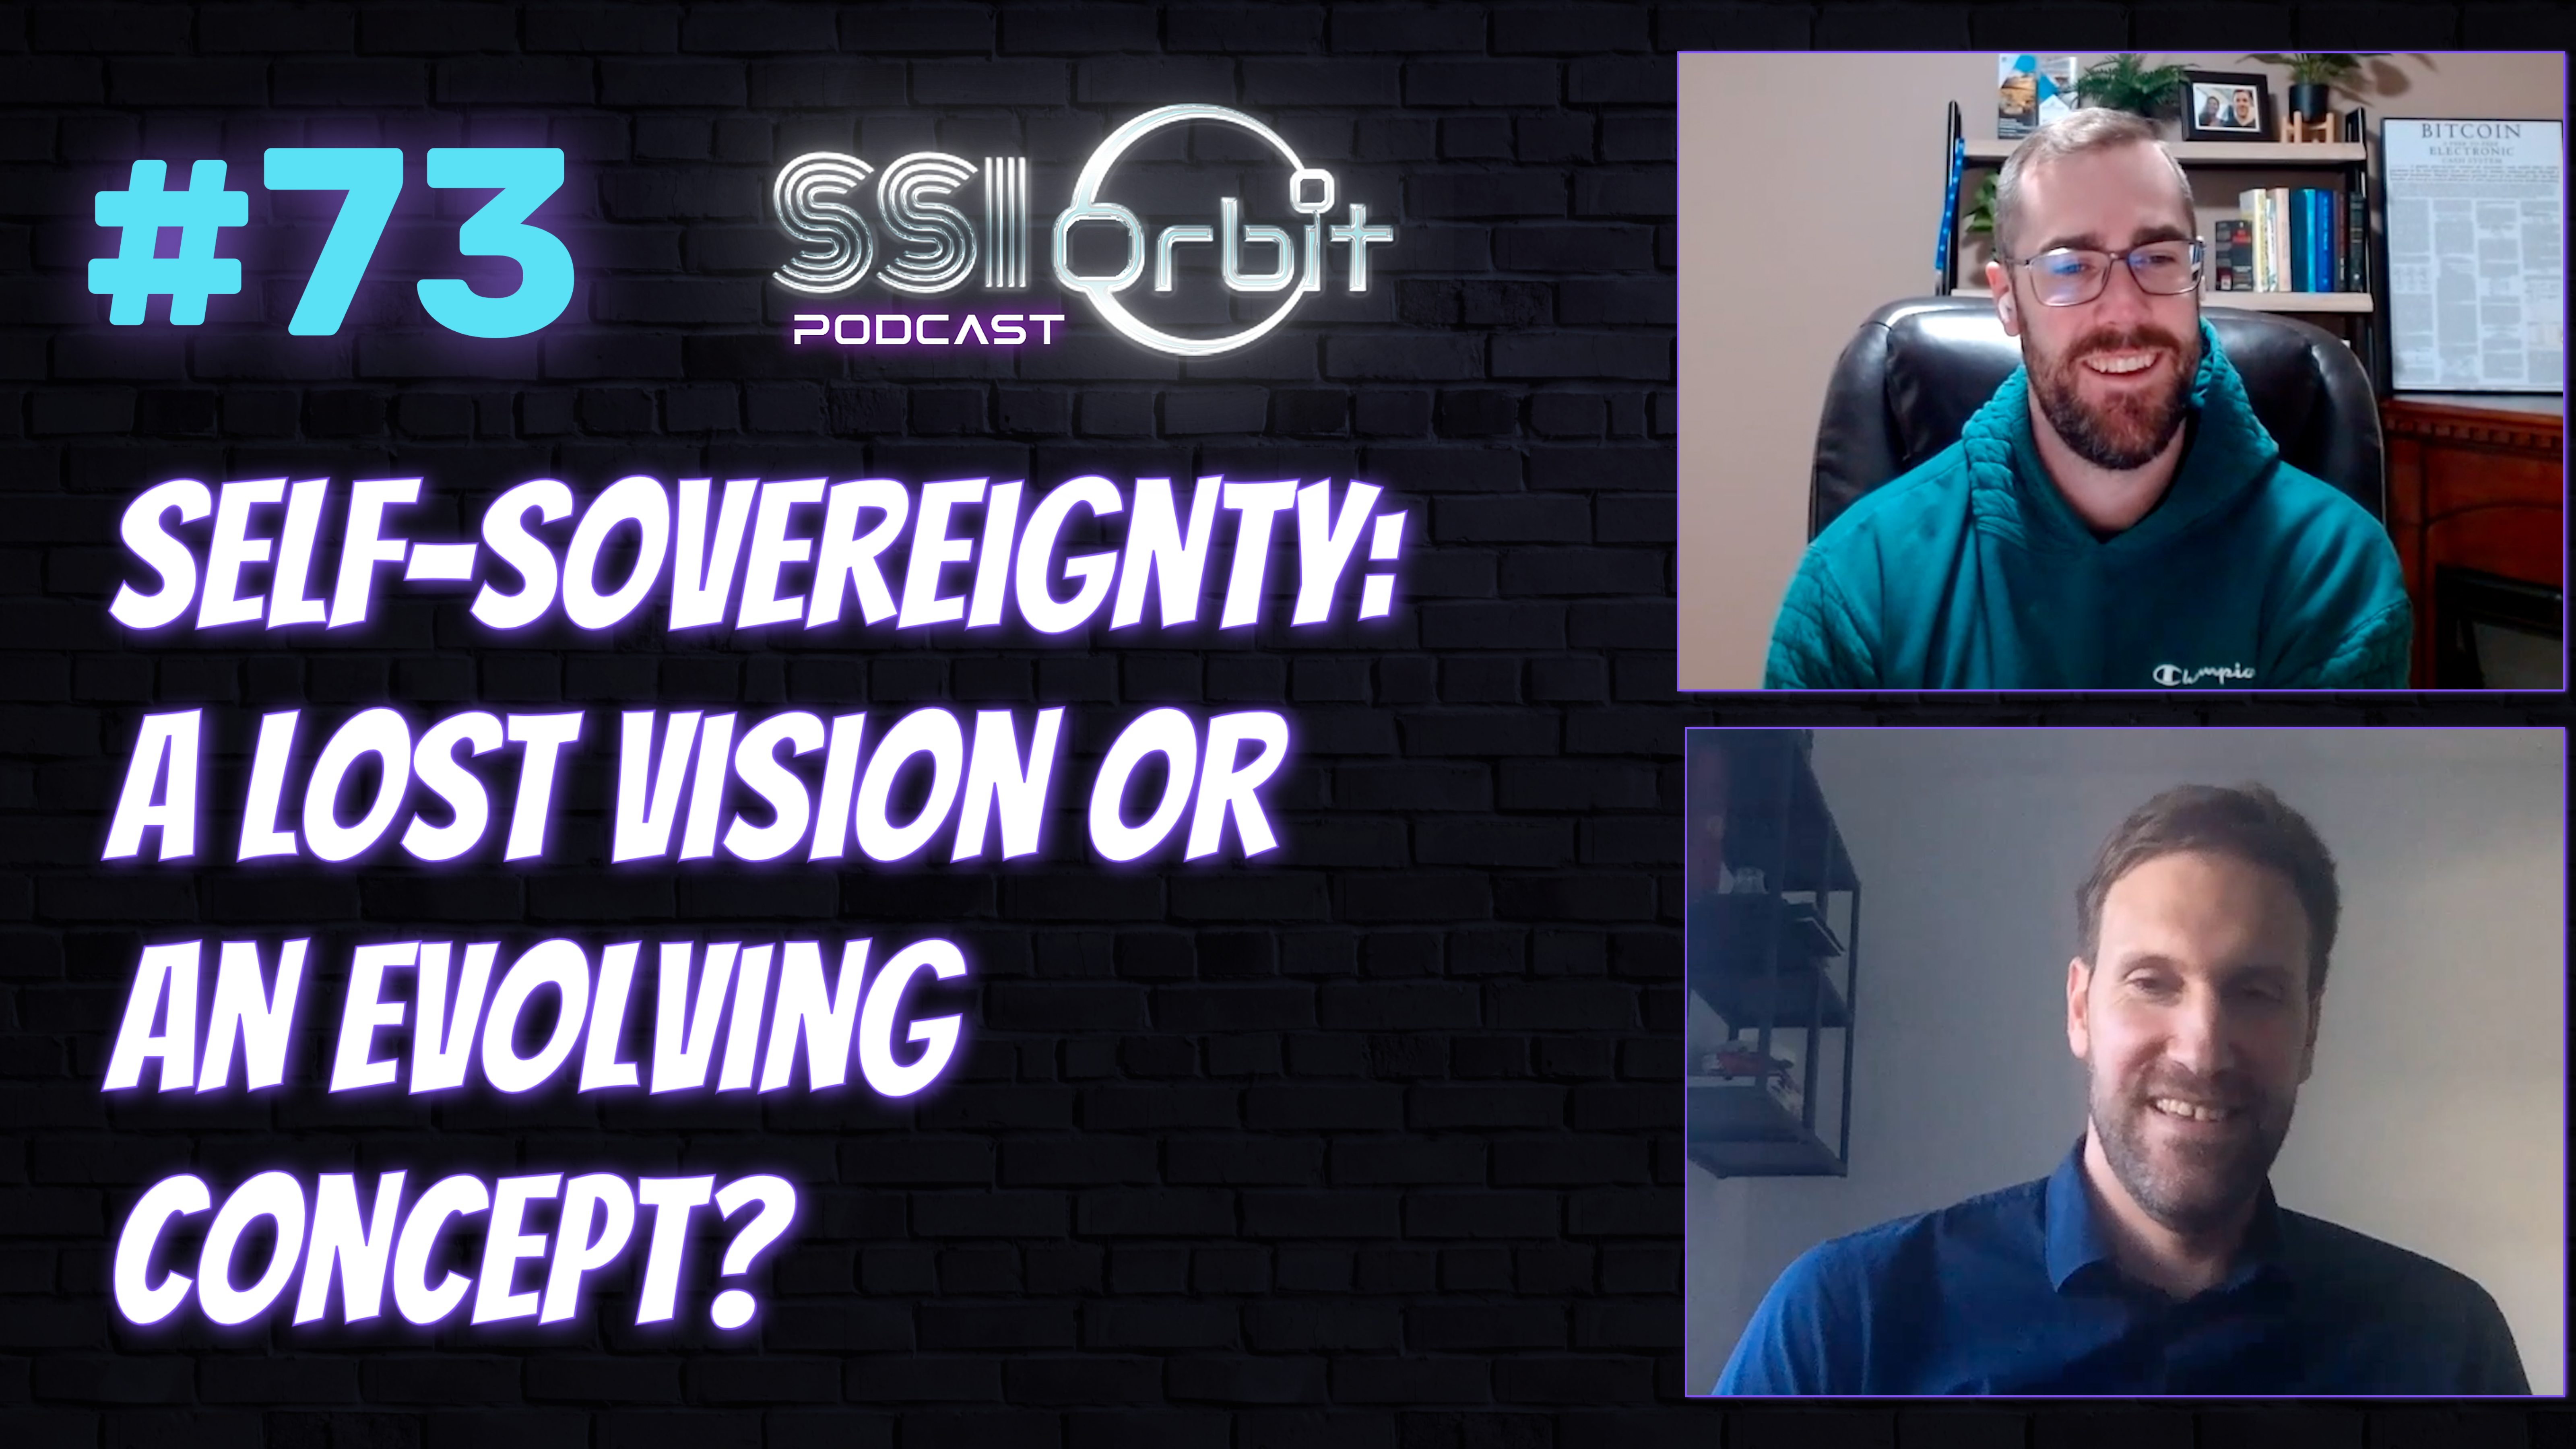 Self-Sovereignty: A Lost Vision or an Evolving Concept? (with Vladimir Vujovic)